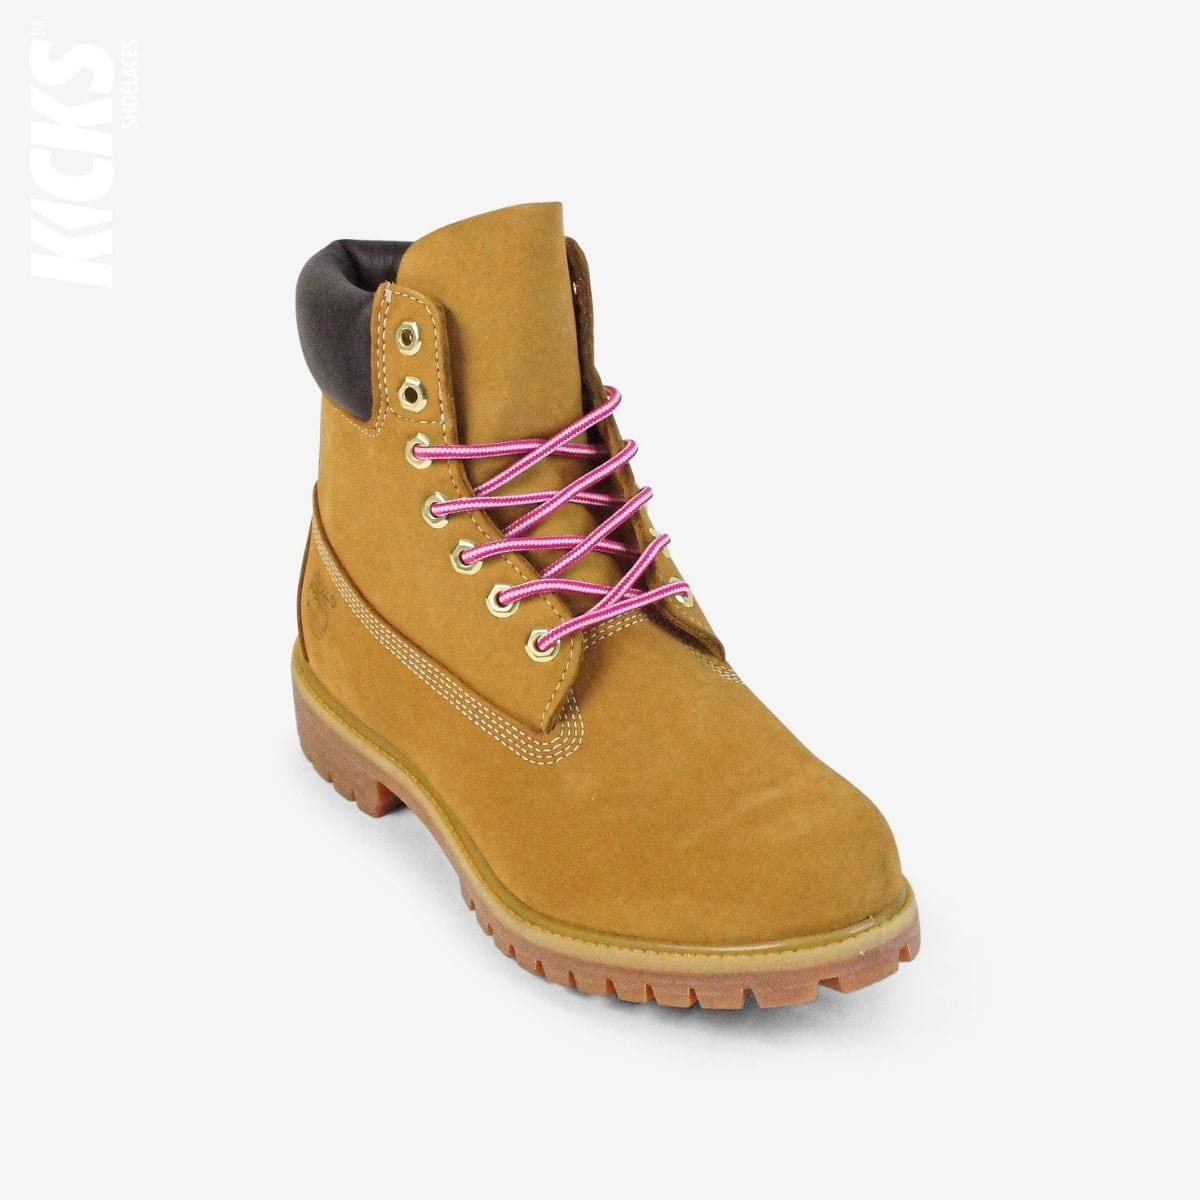 shoelaces-online-pink-and-white-boot-laces-on-timberland-boots